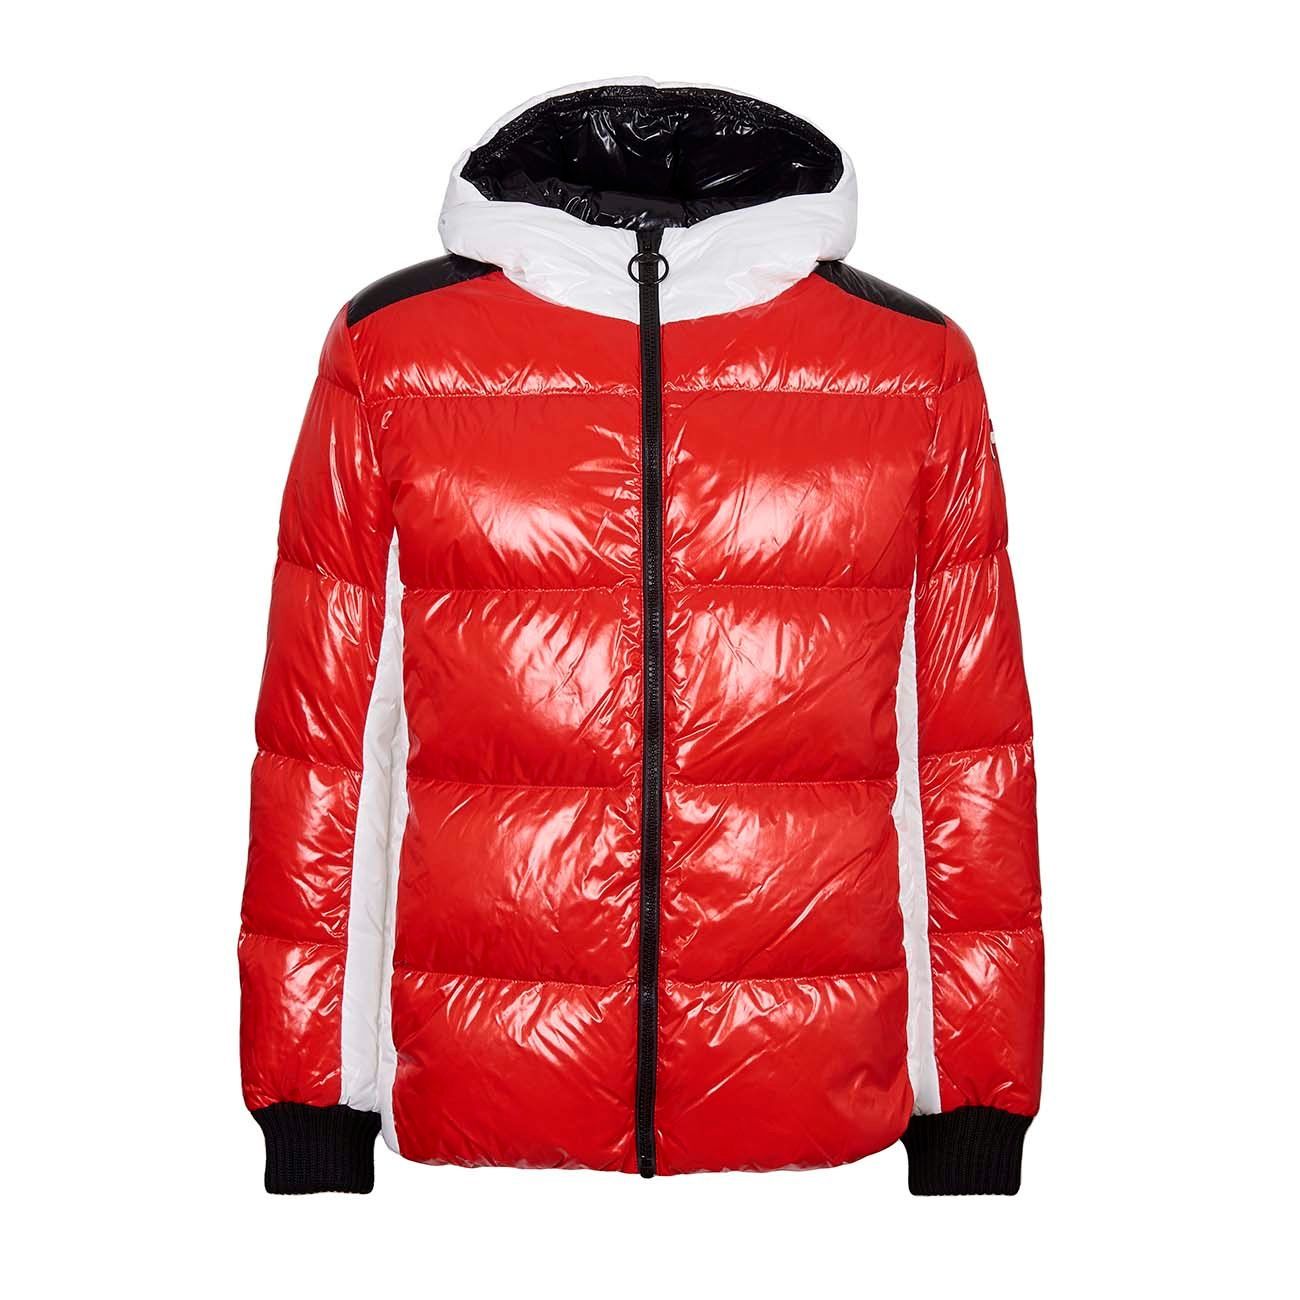 COLMAR ORIGINALS GLOSSY HOODED DOWN JACKET WITH KNIT CUFFS Man Russian White Black |